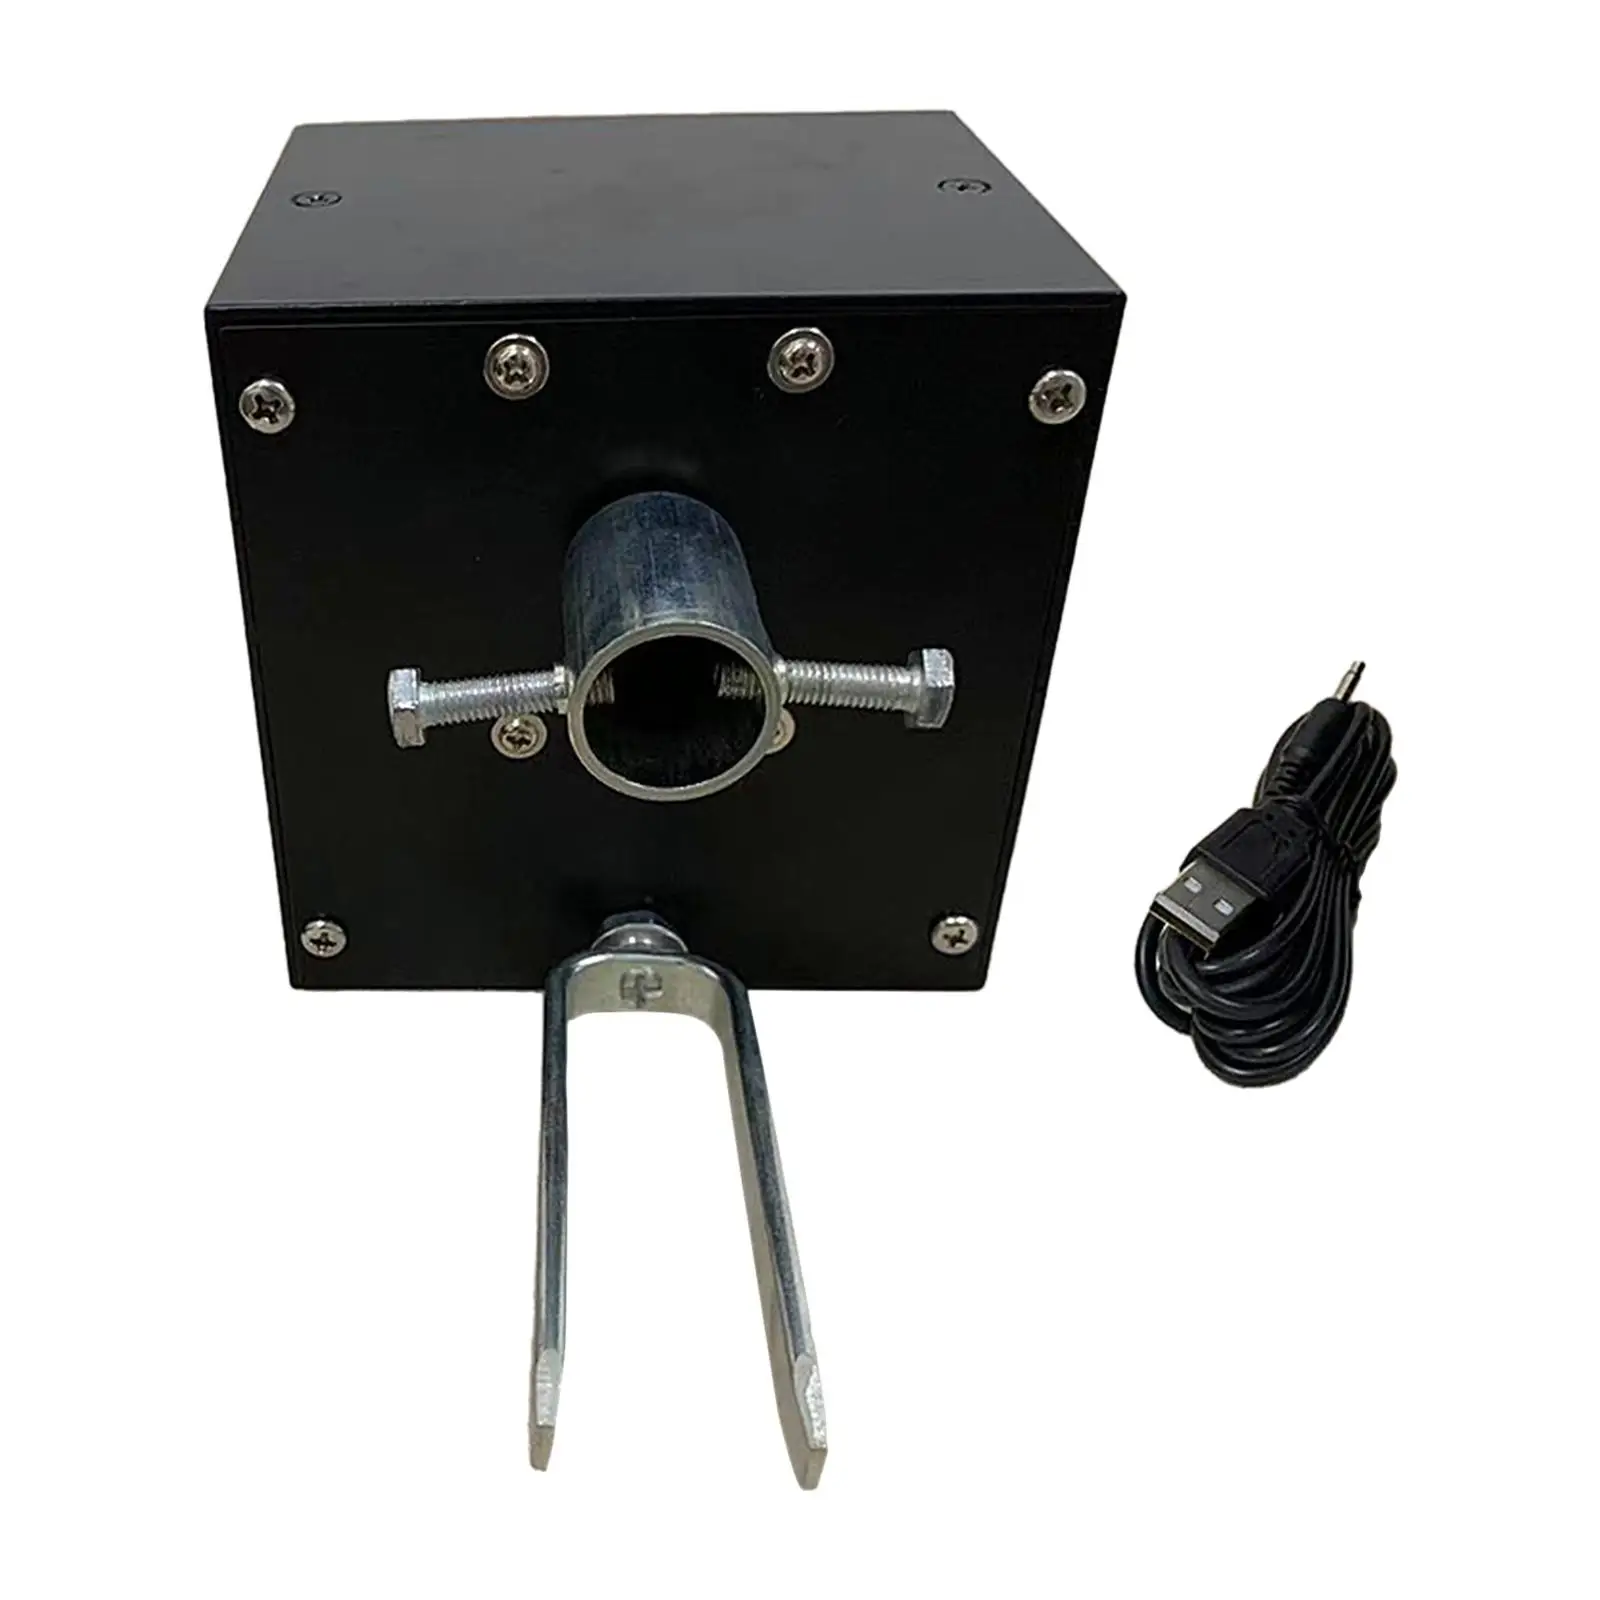 Rotisserie Spit Motor 30kg Load Low Noise Durable Barbecue Tool Universal Black 12V 8W BBQ Motor for Picnic Home Outdoor Camping